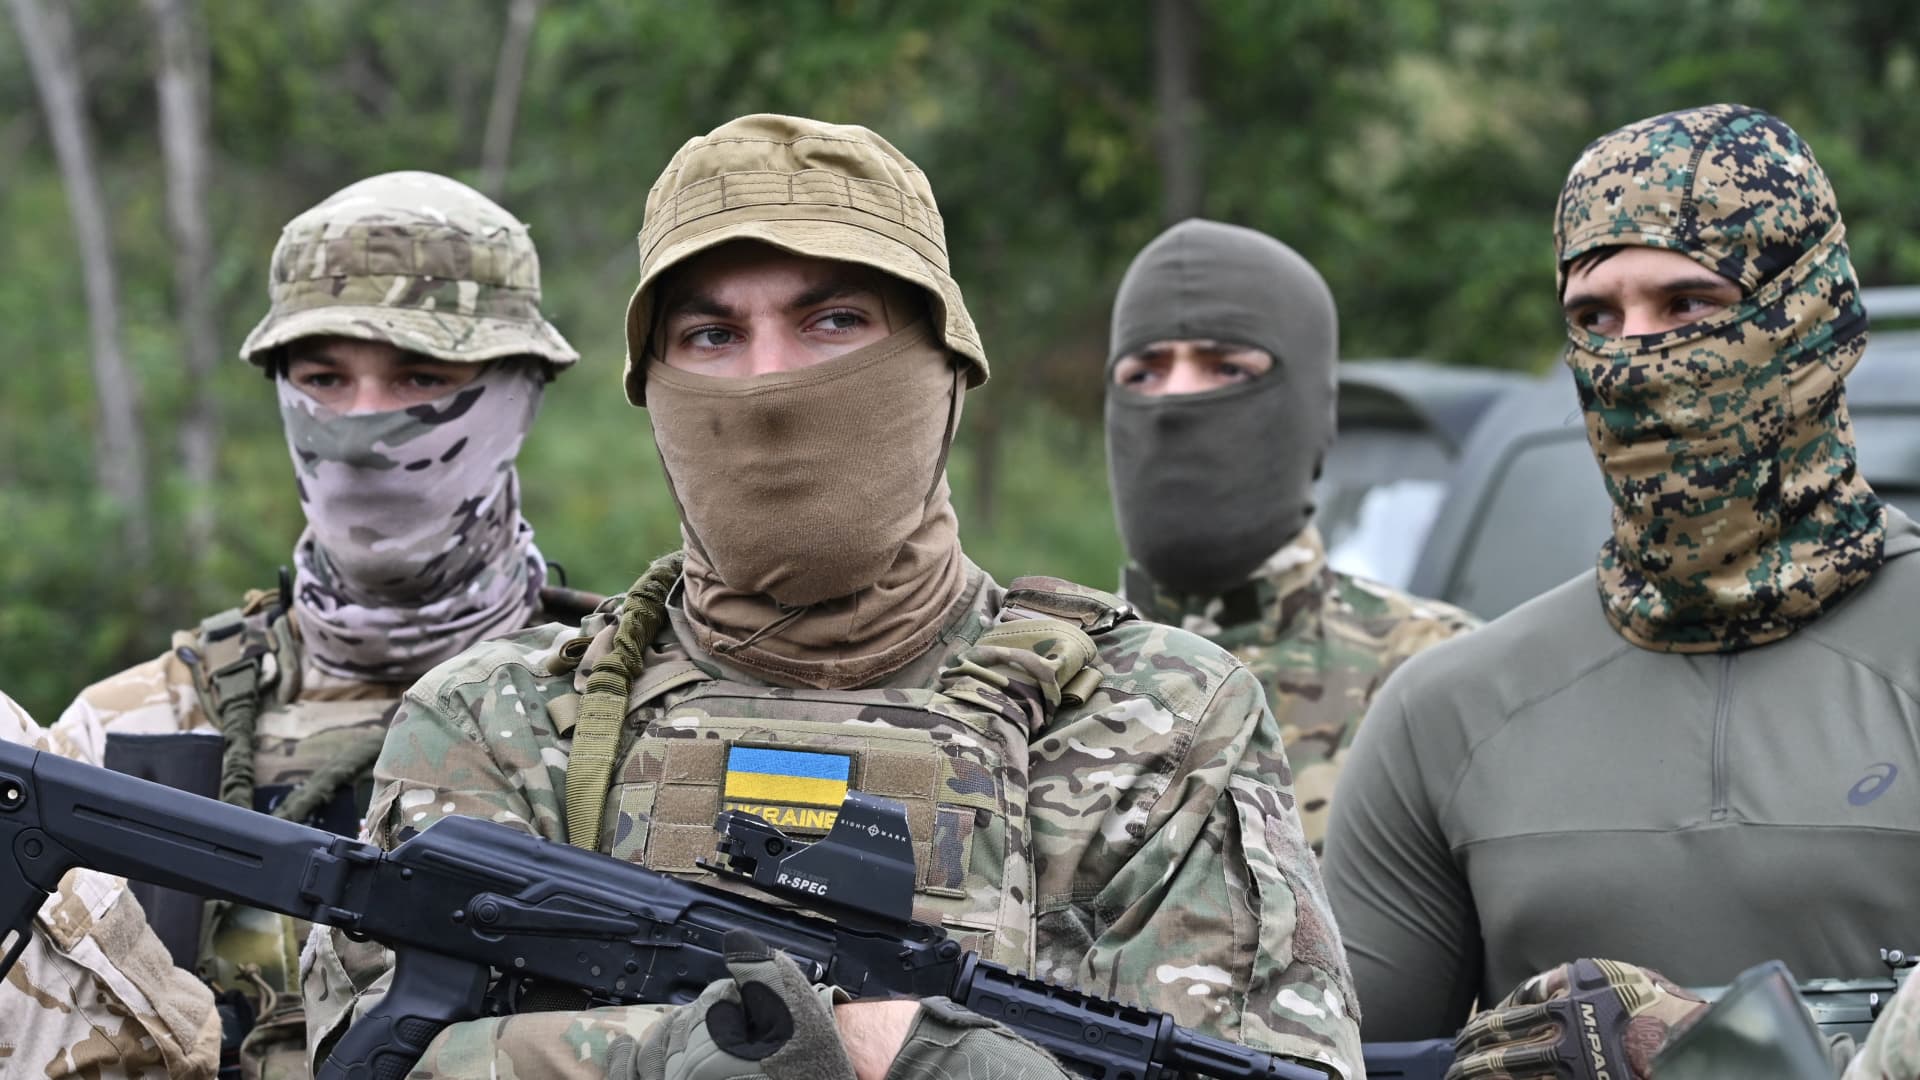 Pro-Ukraine volunteers from Chechnya train near Kyiv. The Zelenskyy government has displayed growing confidence in recent weeks, increasingly taking the initiative in a conflict that the Kremlin itself has admitted is stalled.